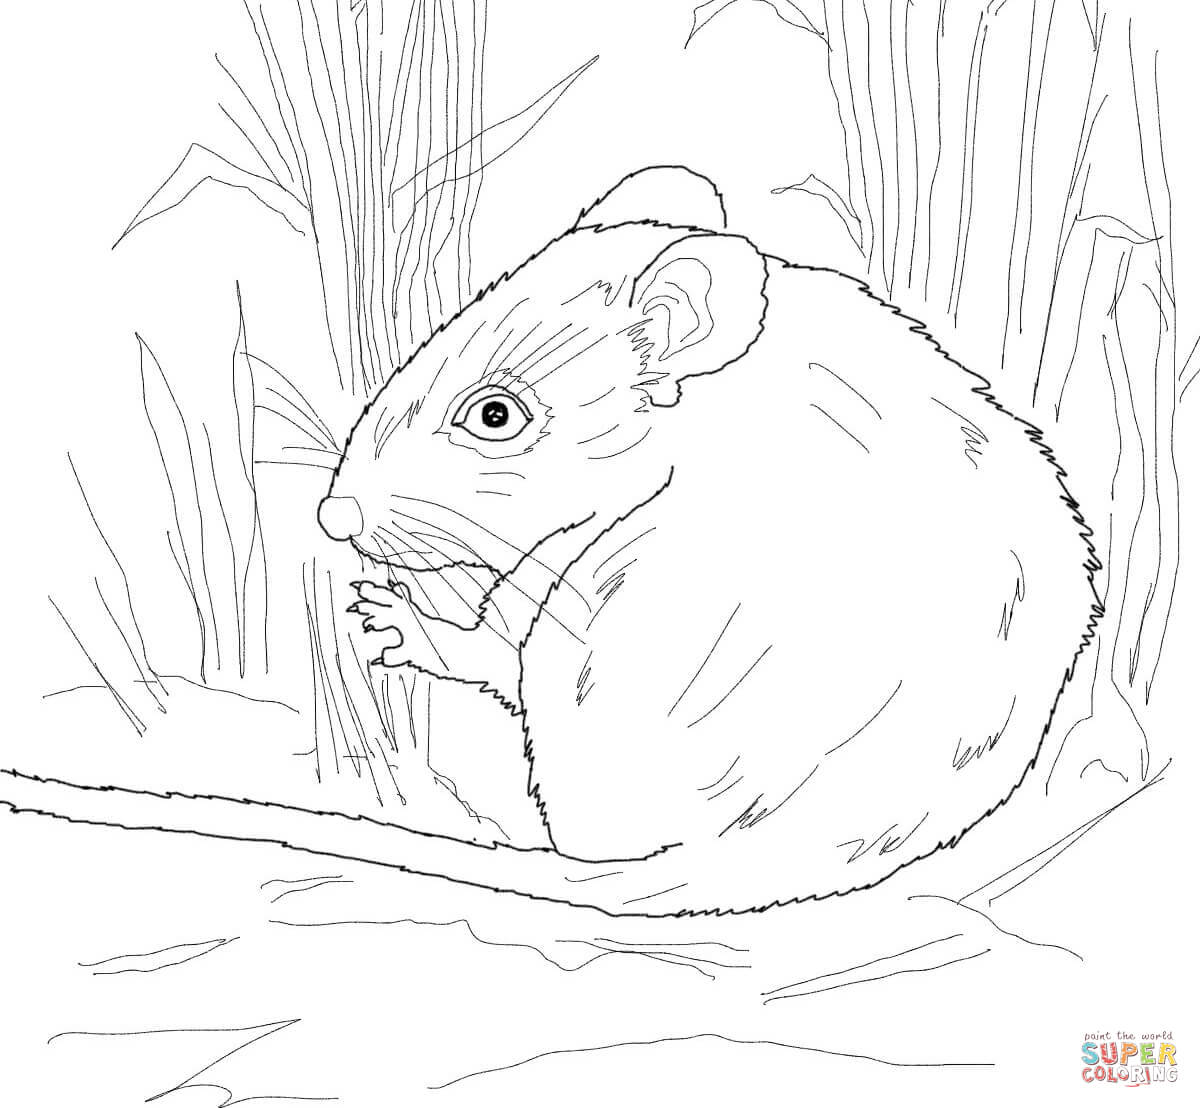 Harvest Mouse coloring #5, Download drawings